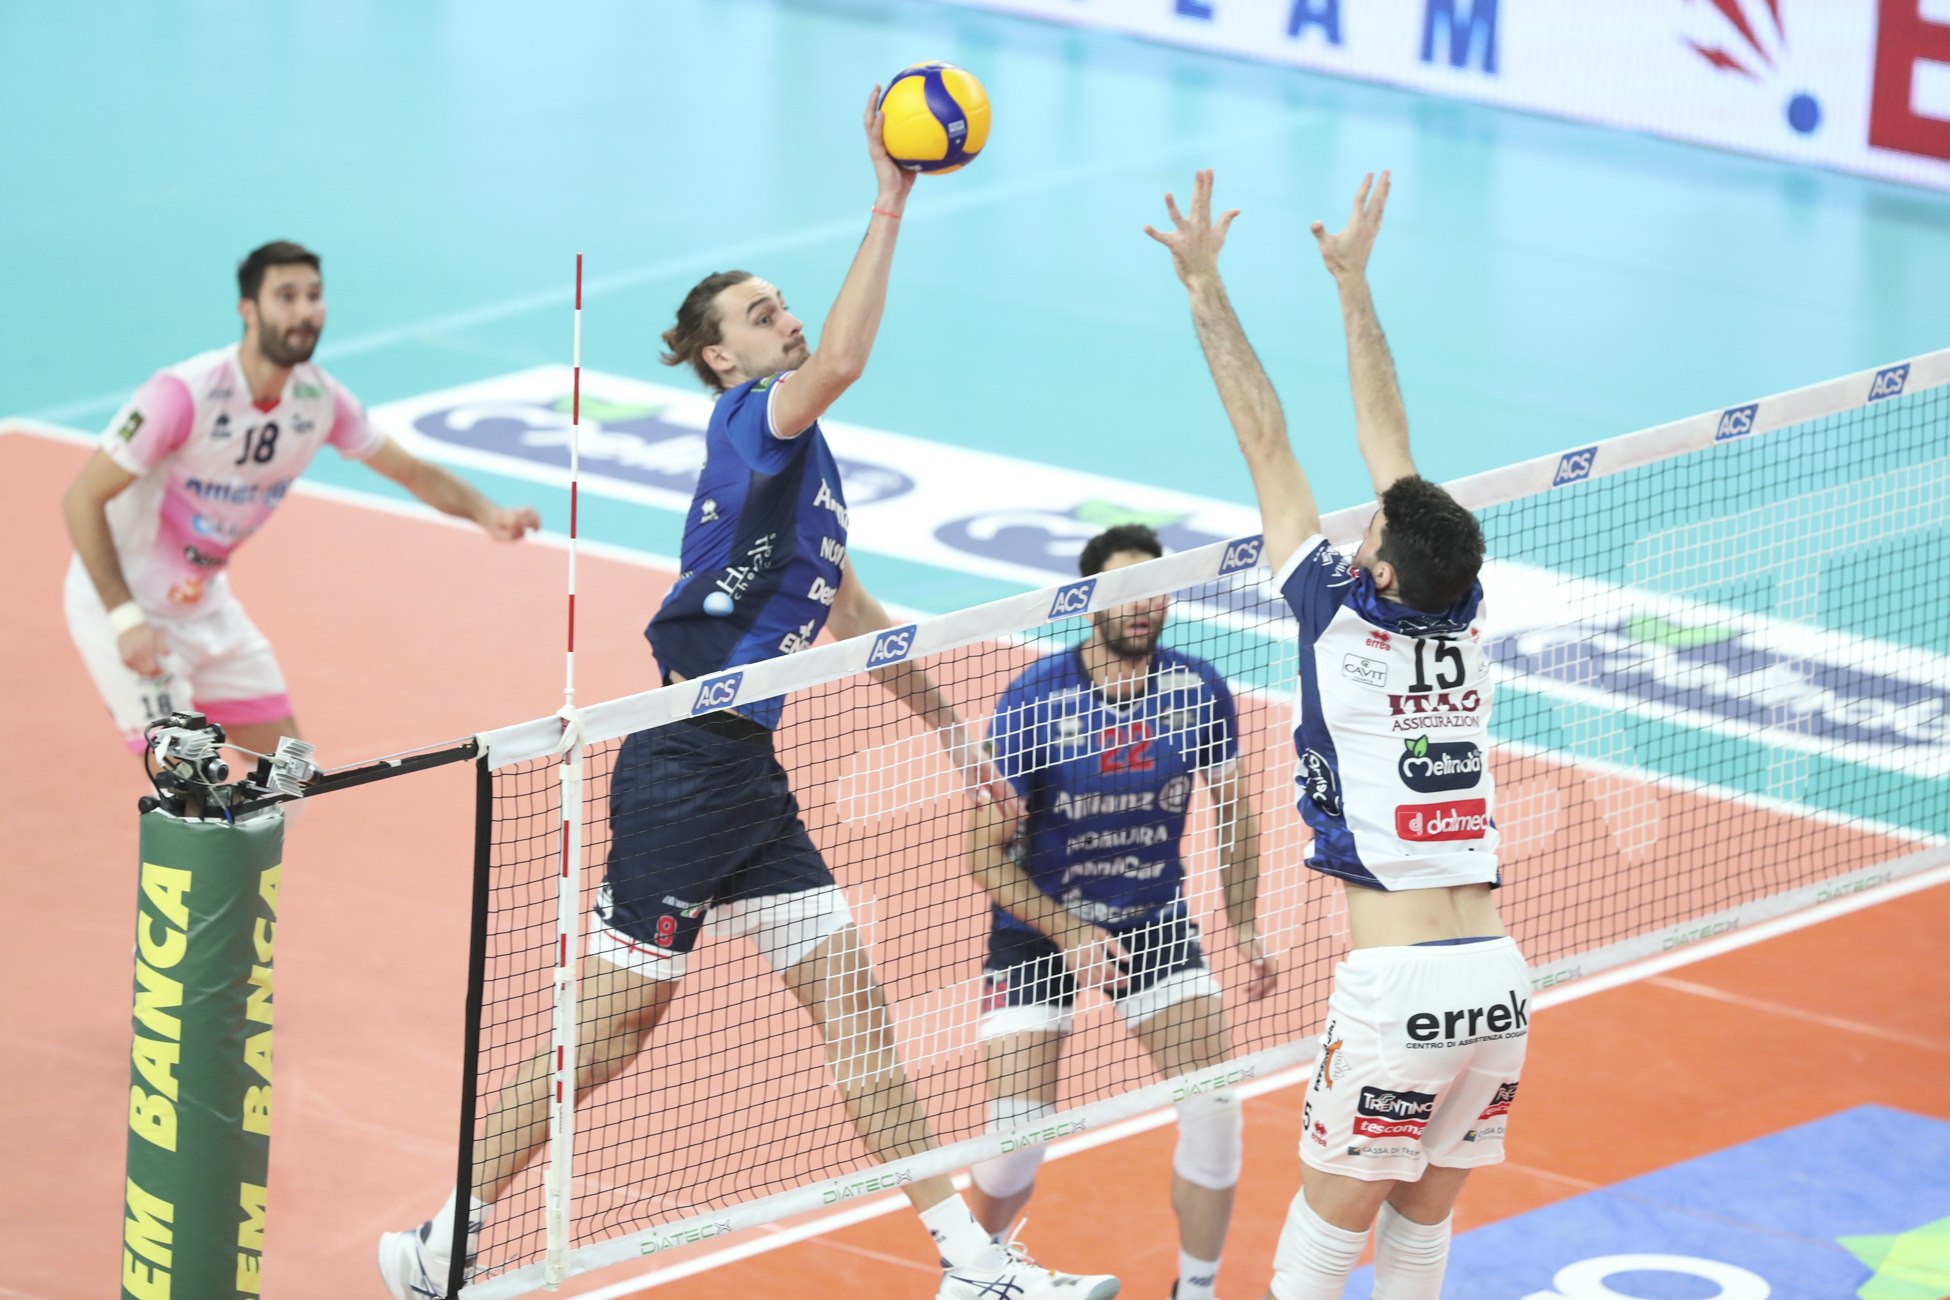 Whats On Your guide to this weeks best LIVE matches volleyballworld